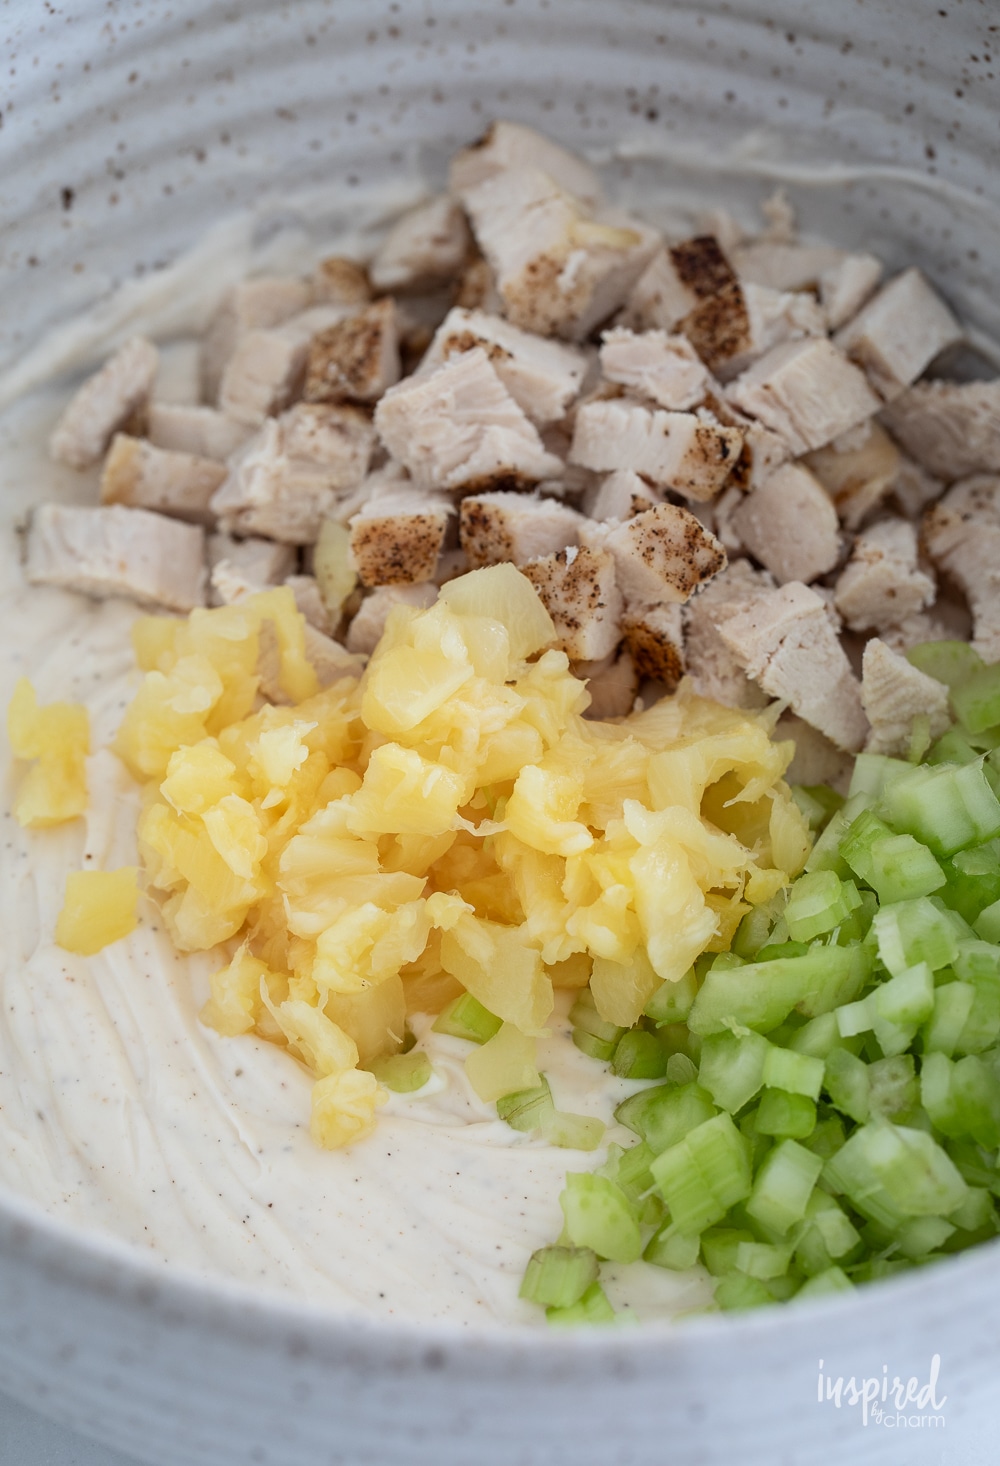 ingredients for chicken salad unmixed and in a bowl.